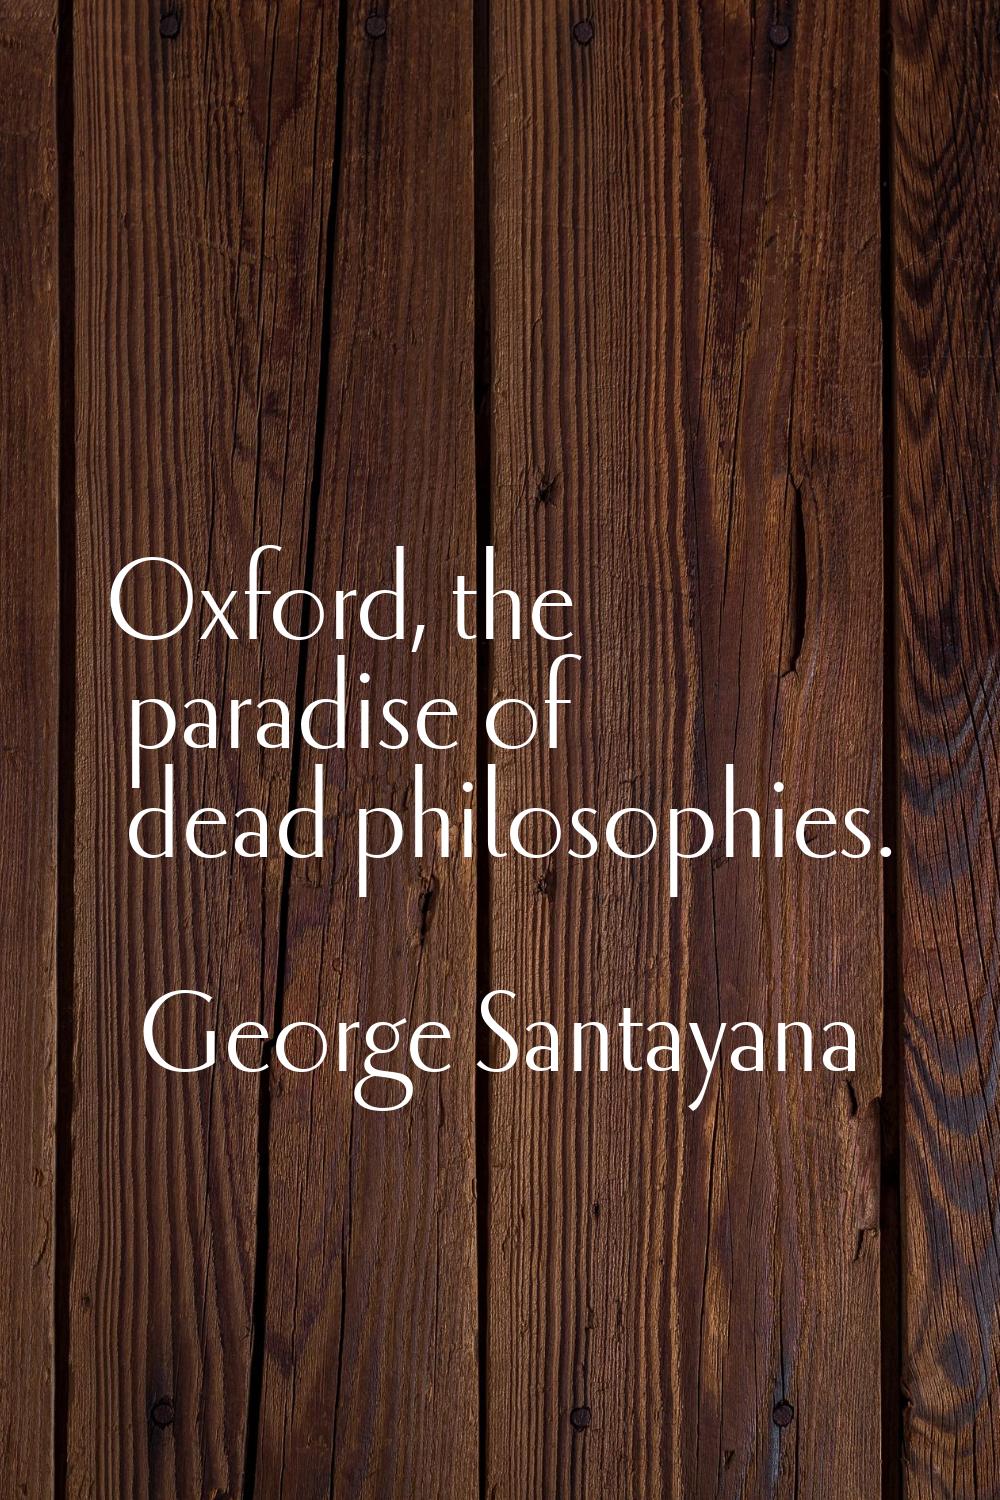 Oxford, the paradise of dead philosophies.